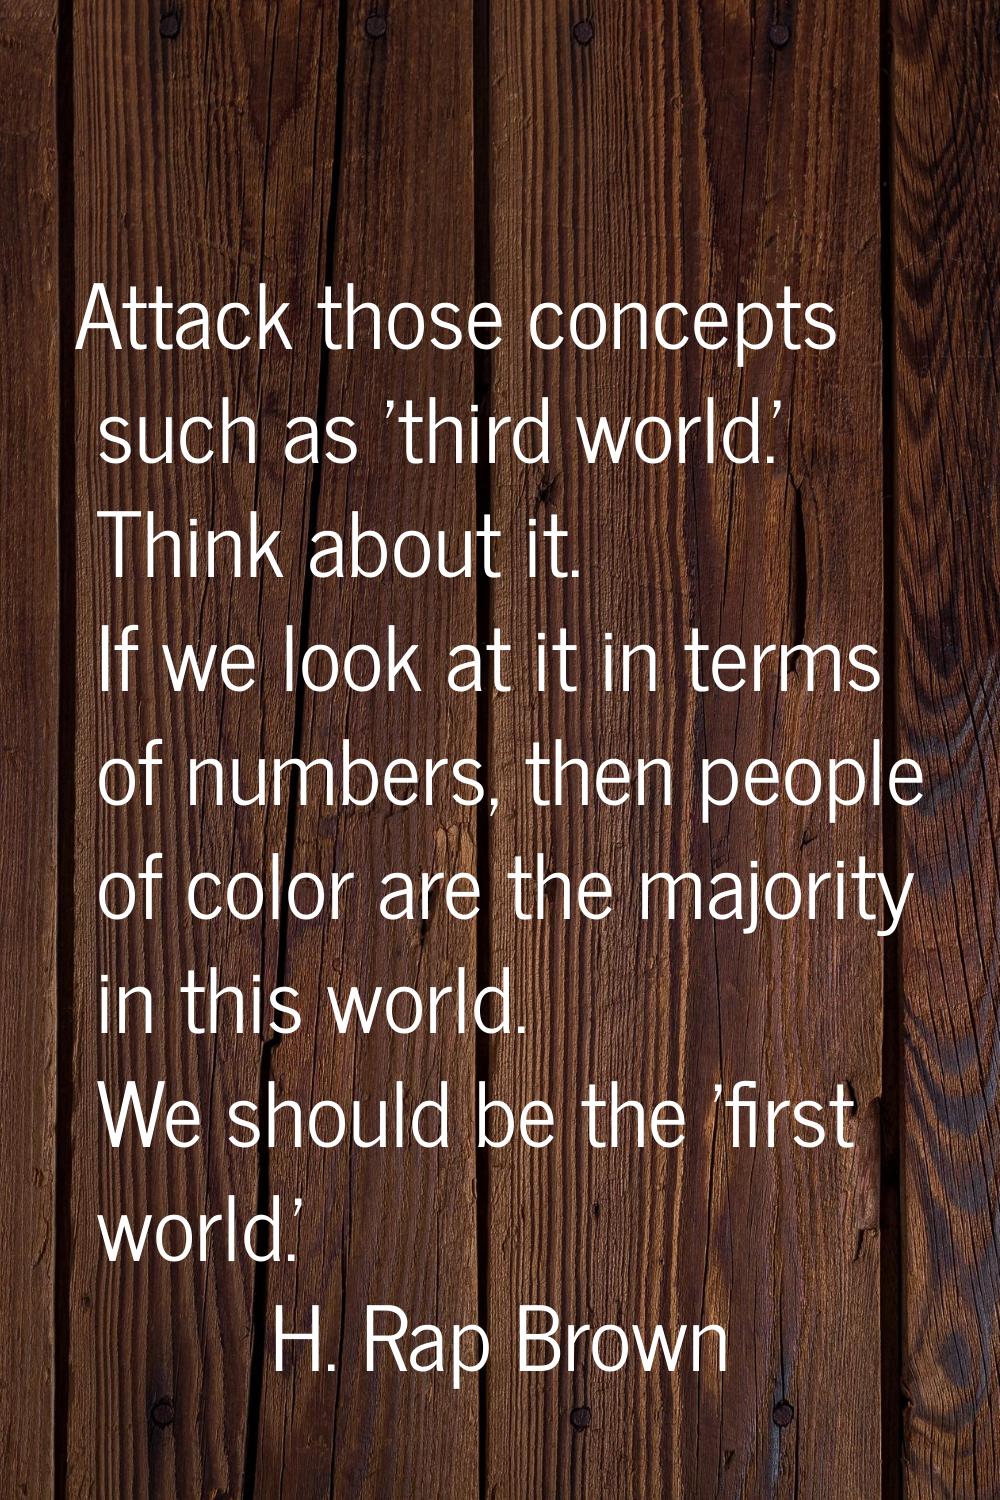 Attack those concepts such as 'third world.' Think about it. If we look at it in terms of numbers, 